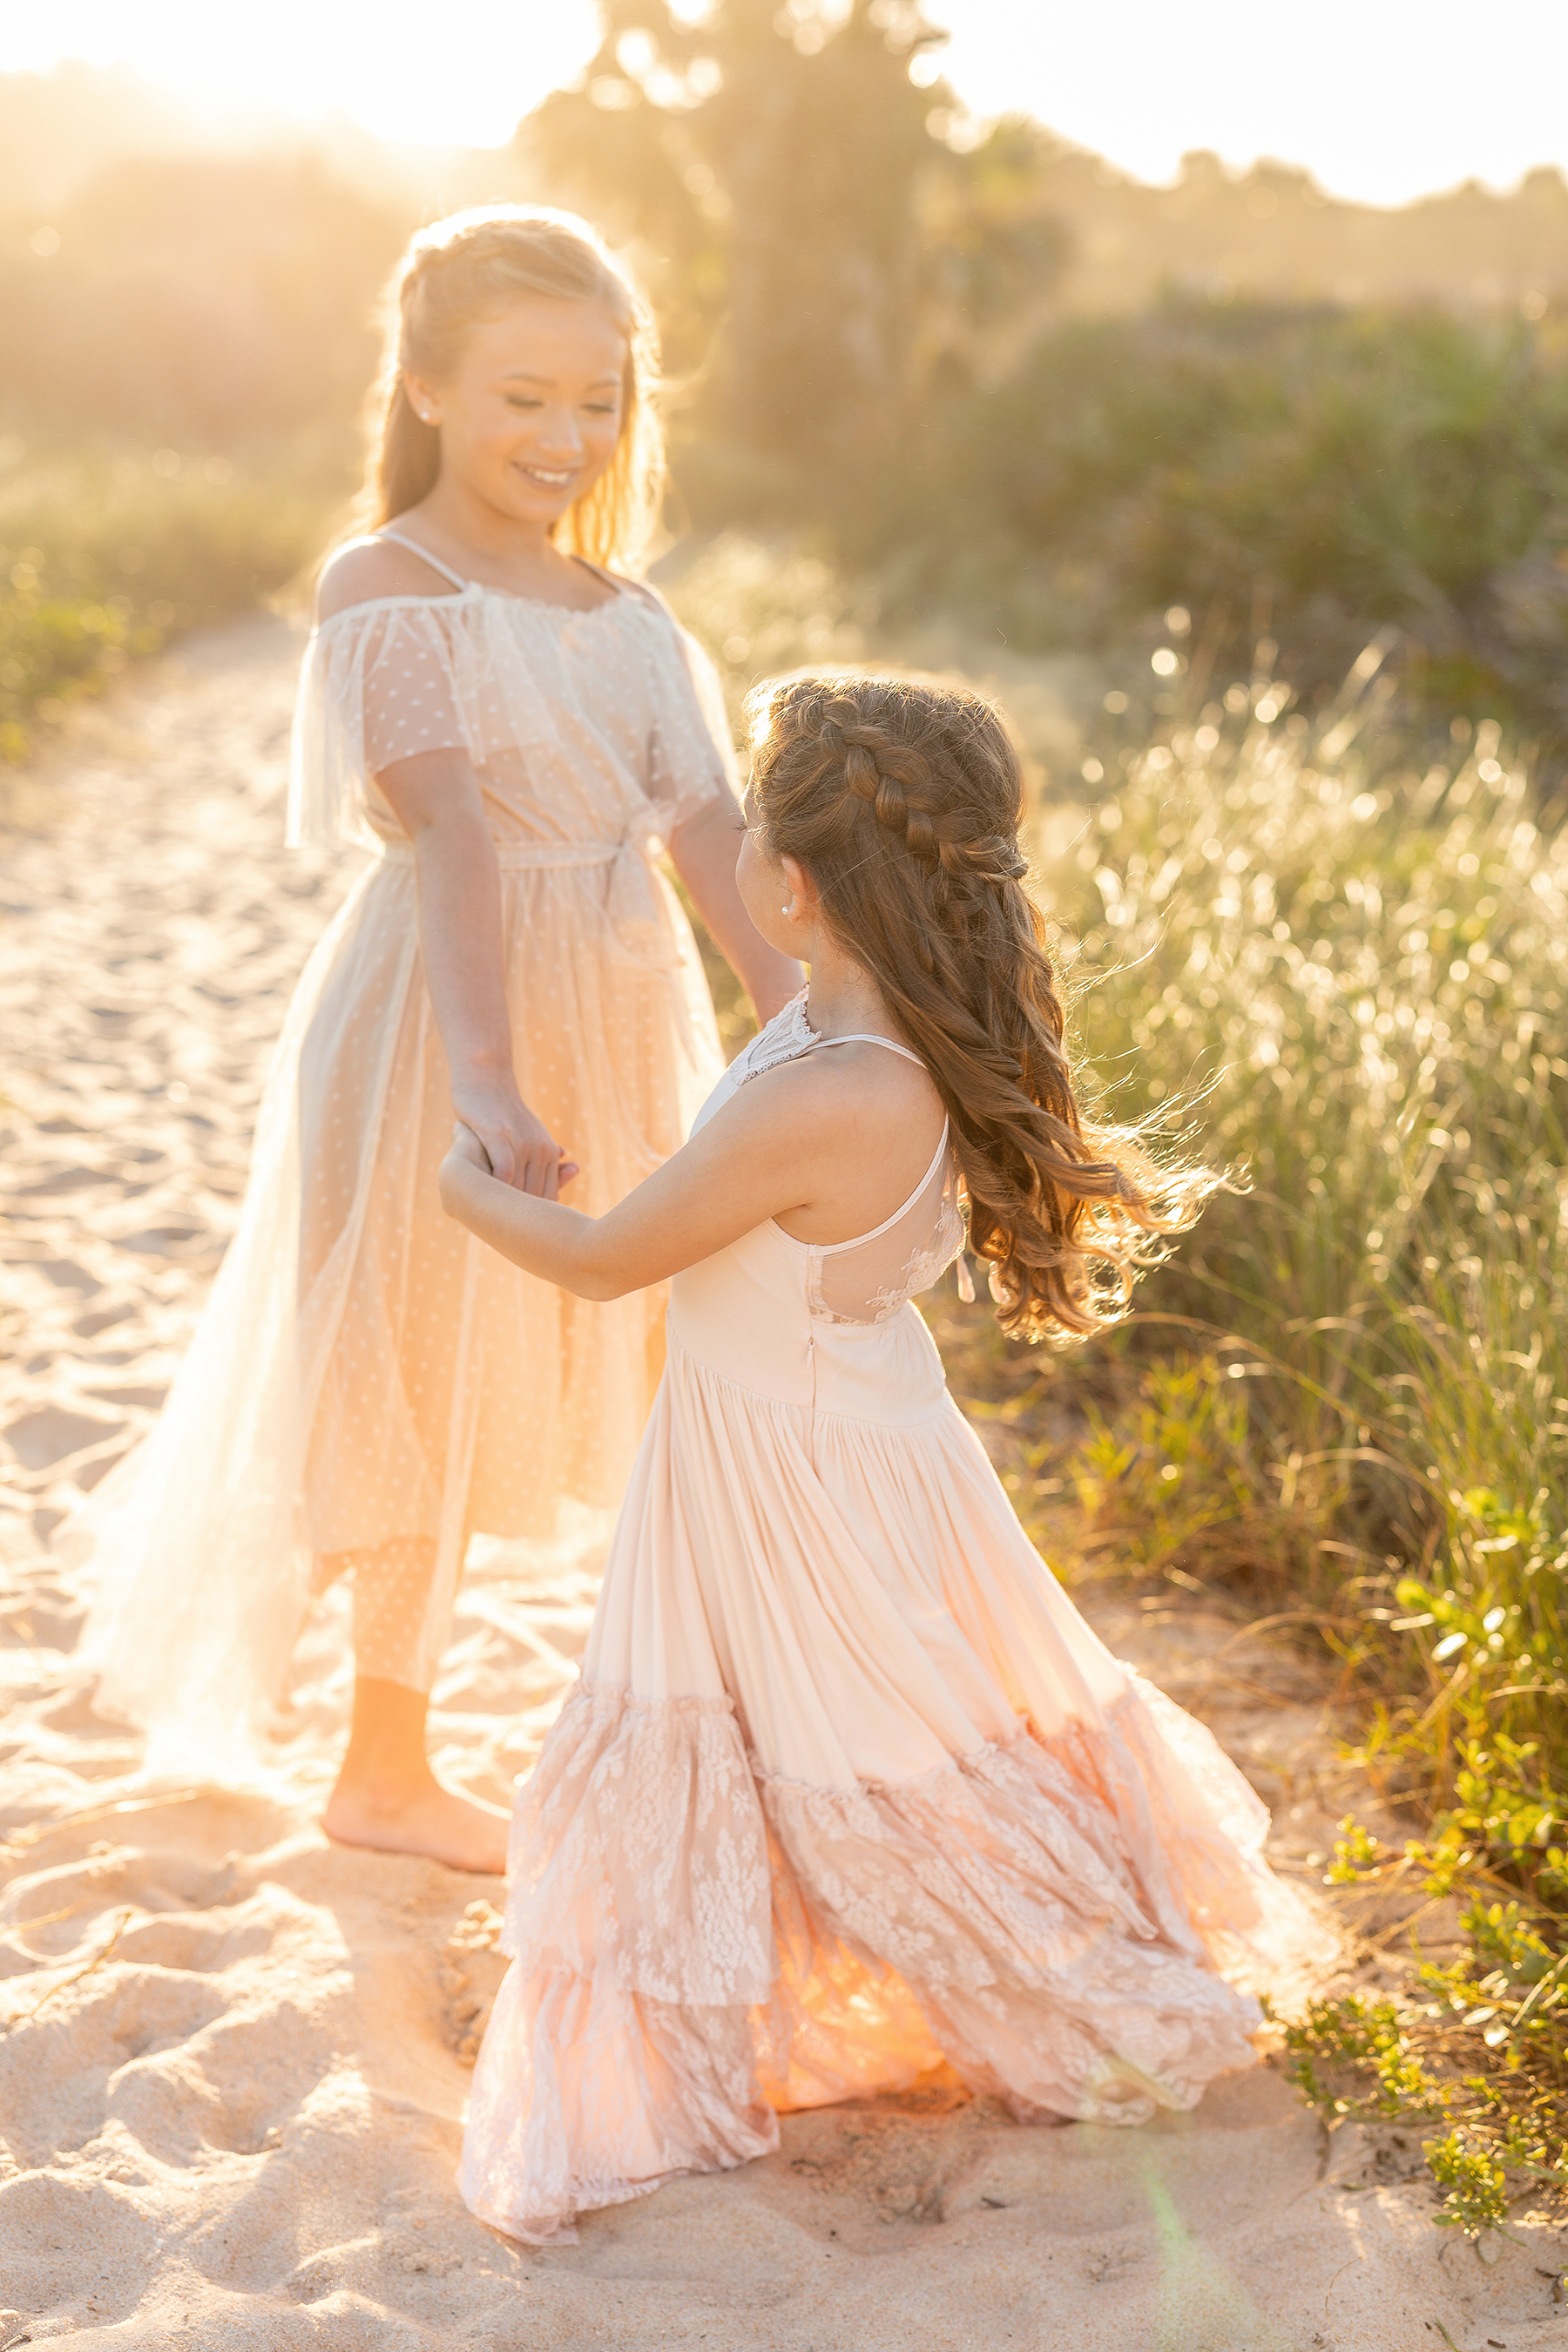 Two little girls twirl together on a light filled evening at sunset on the sand.